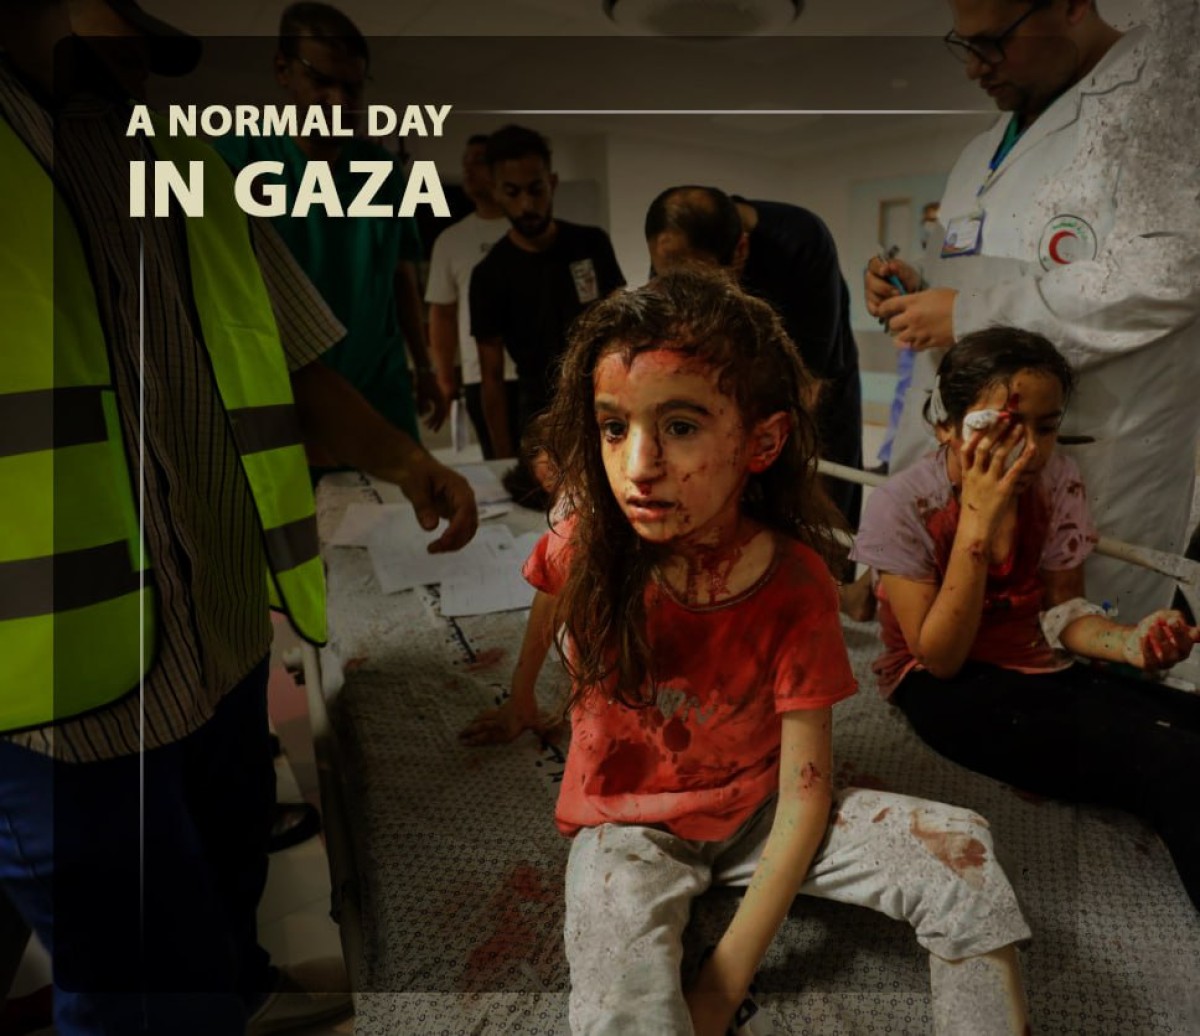 A NORMAL DAY IN GAZA